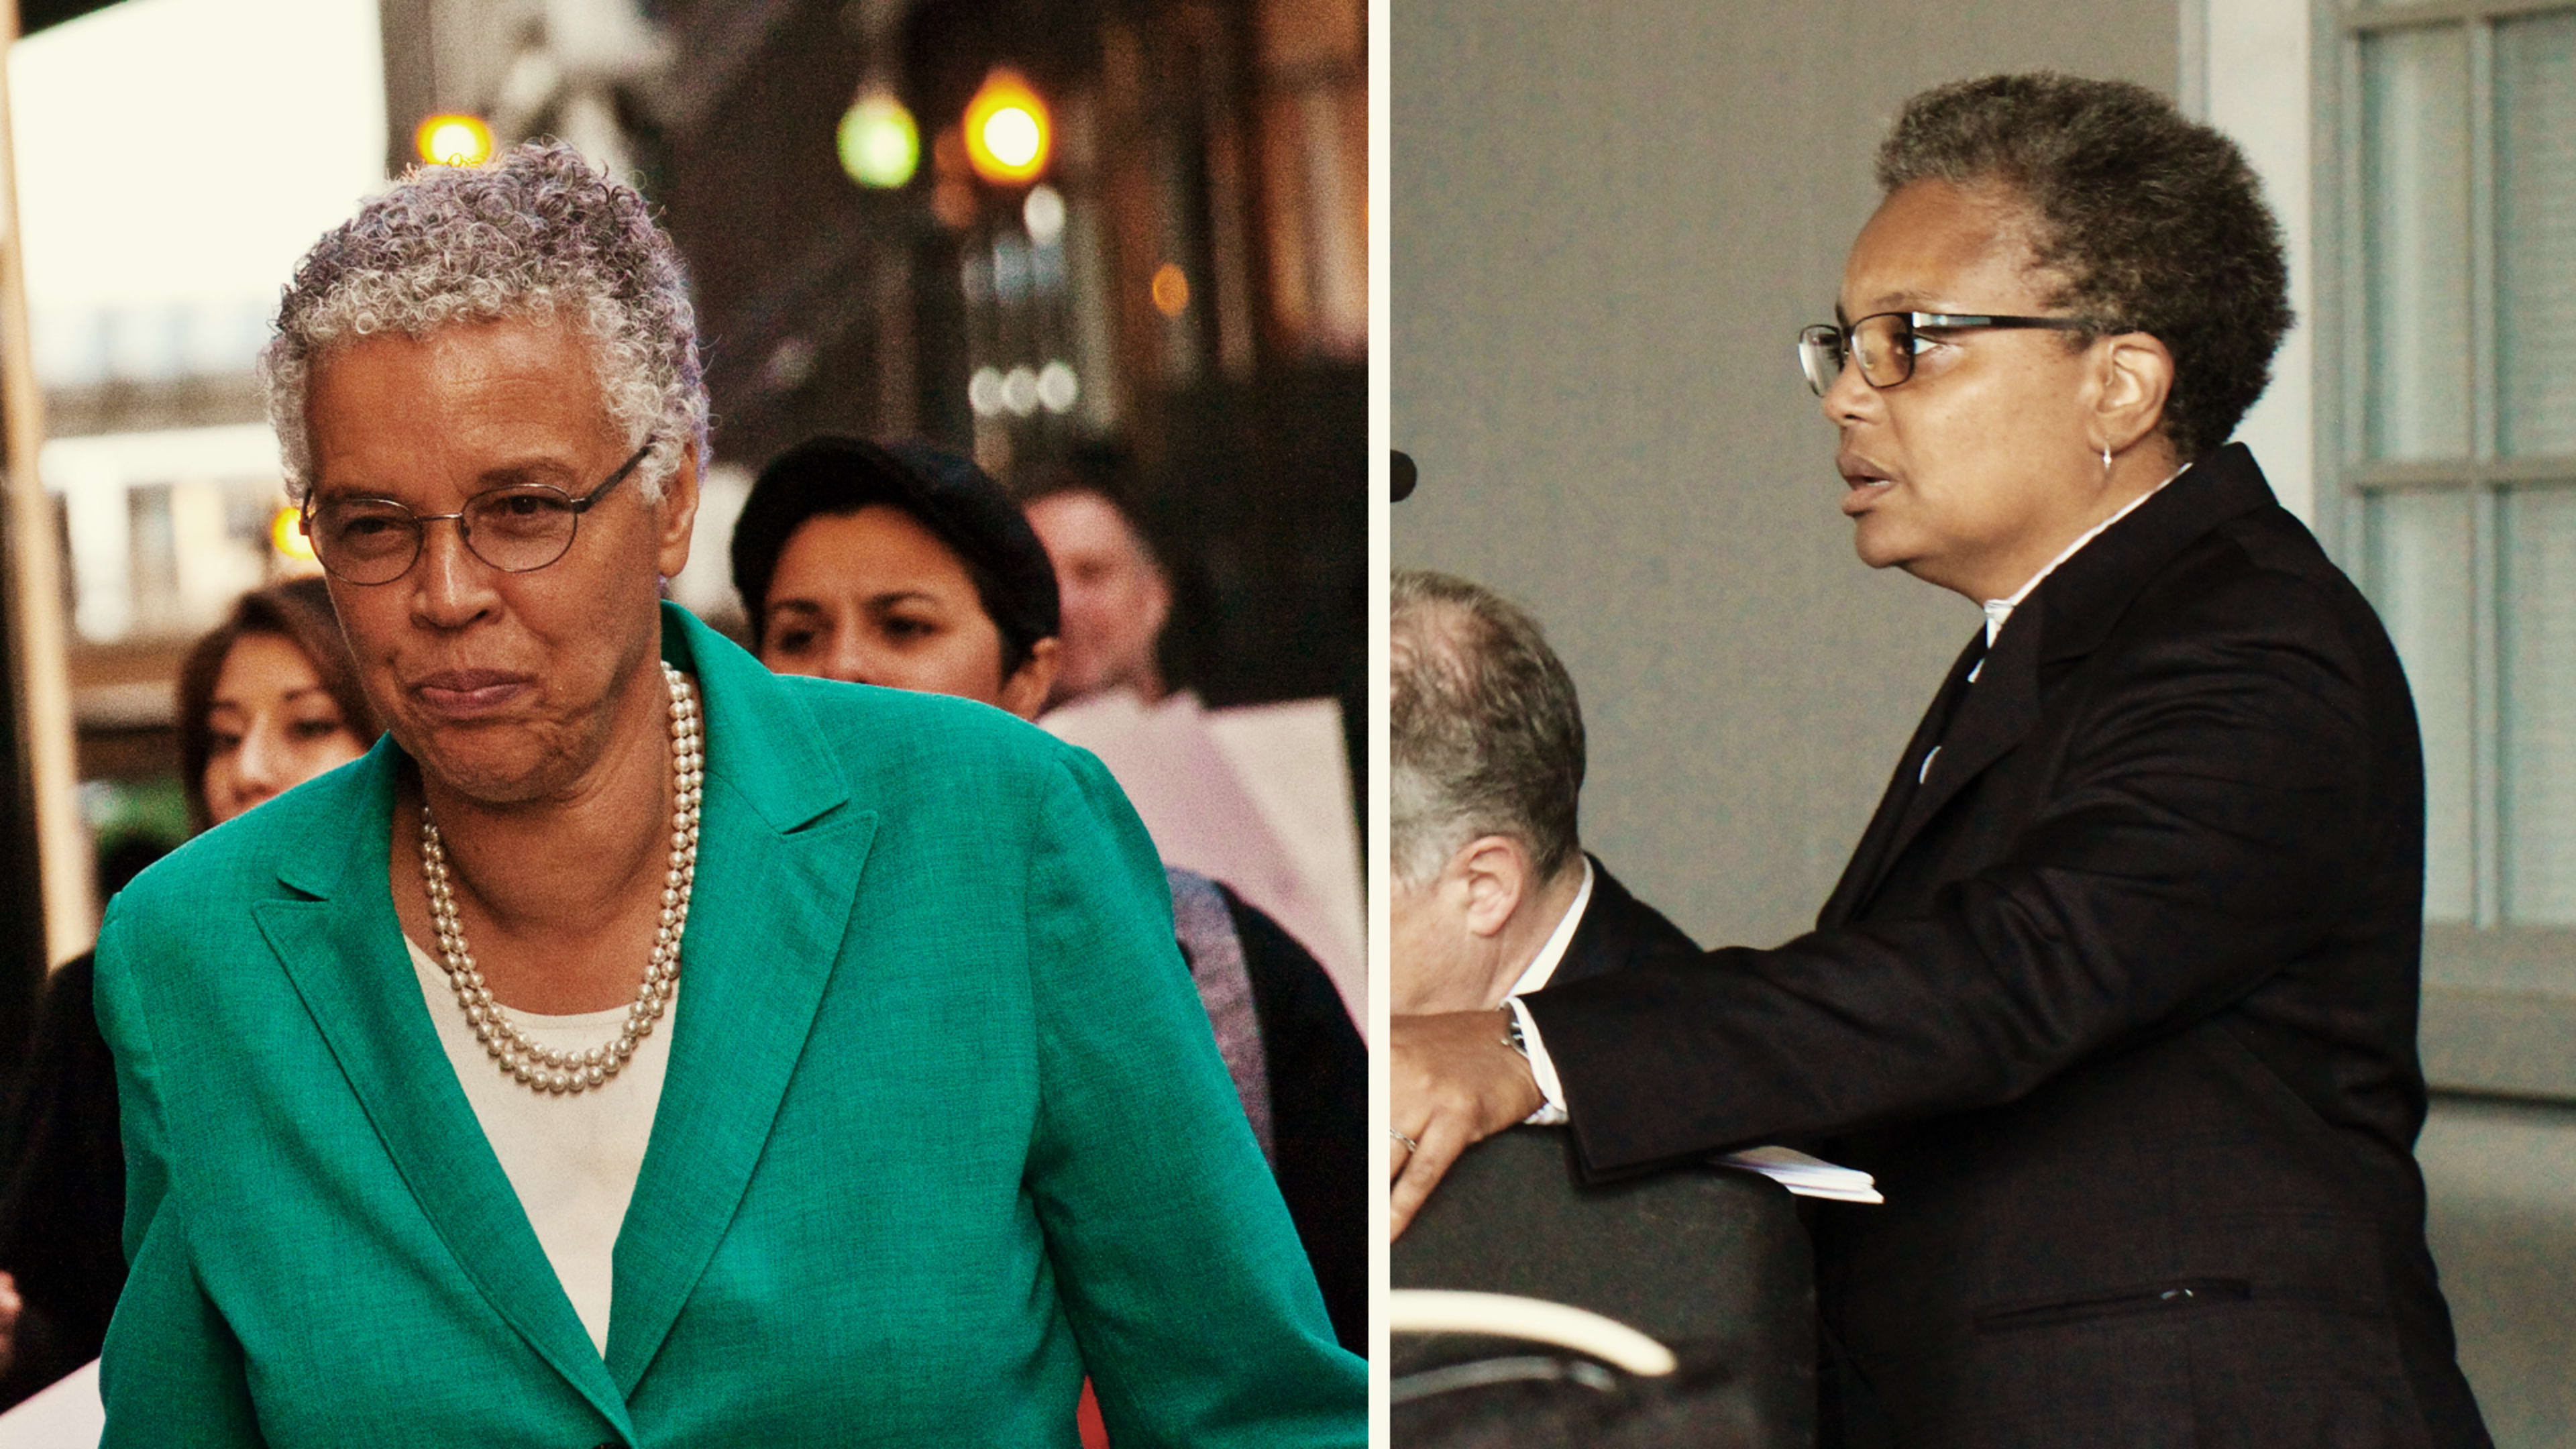 Chicago is set to elect the first black female mayor in its 181-year history